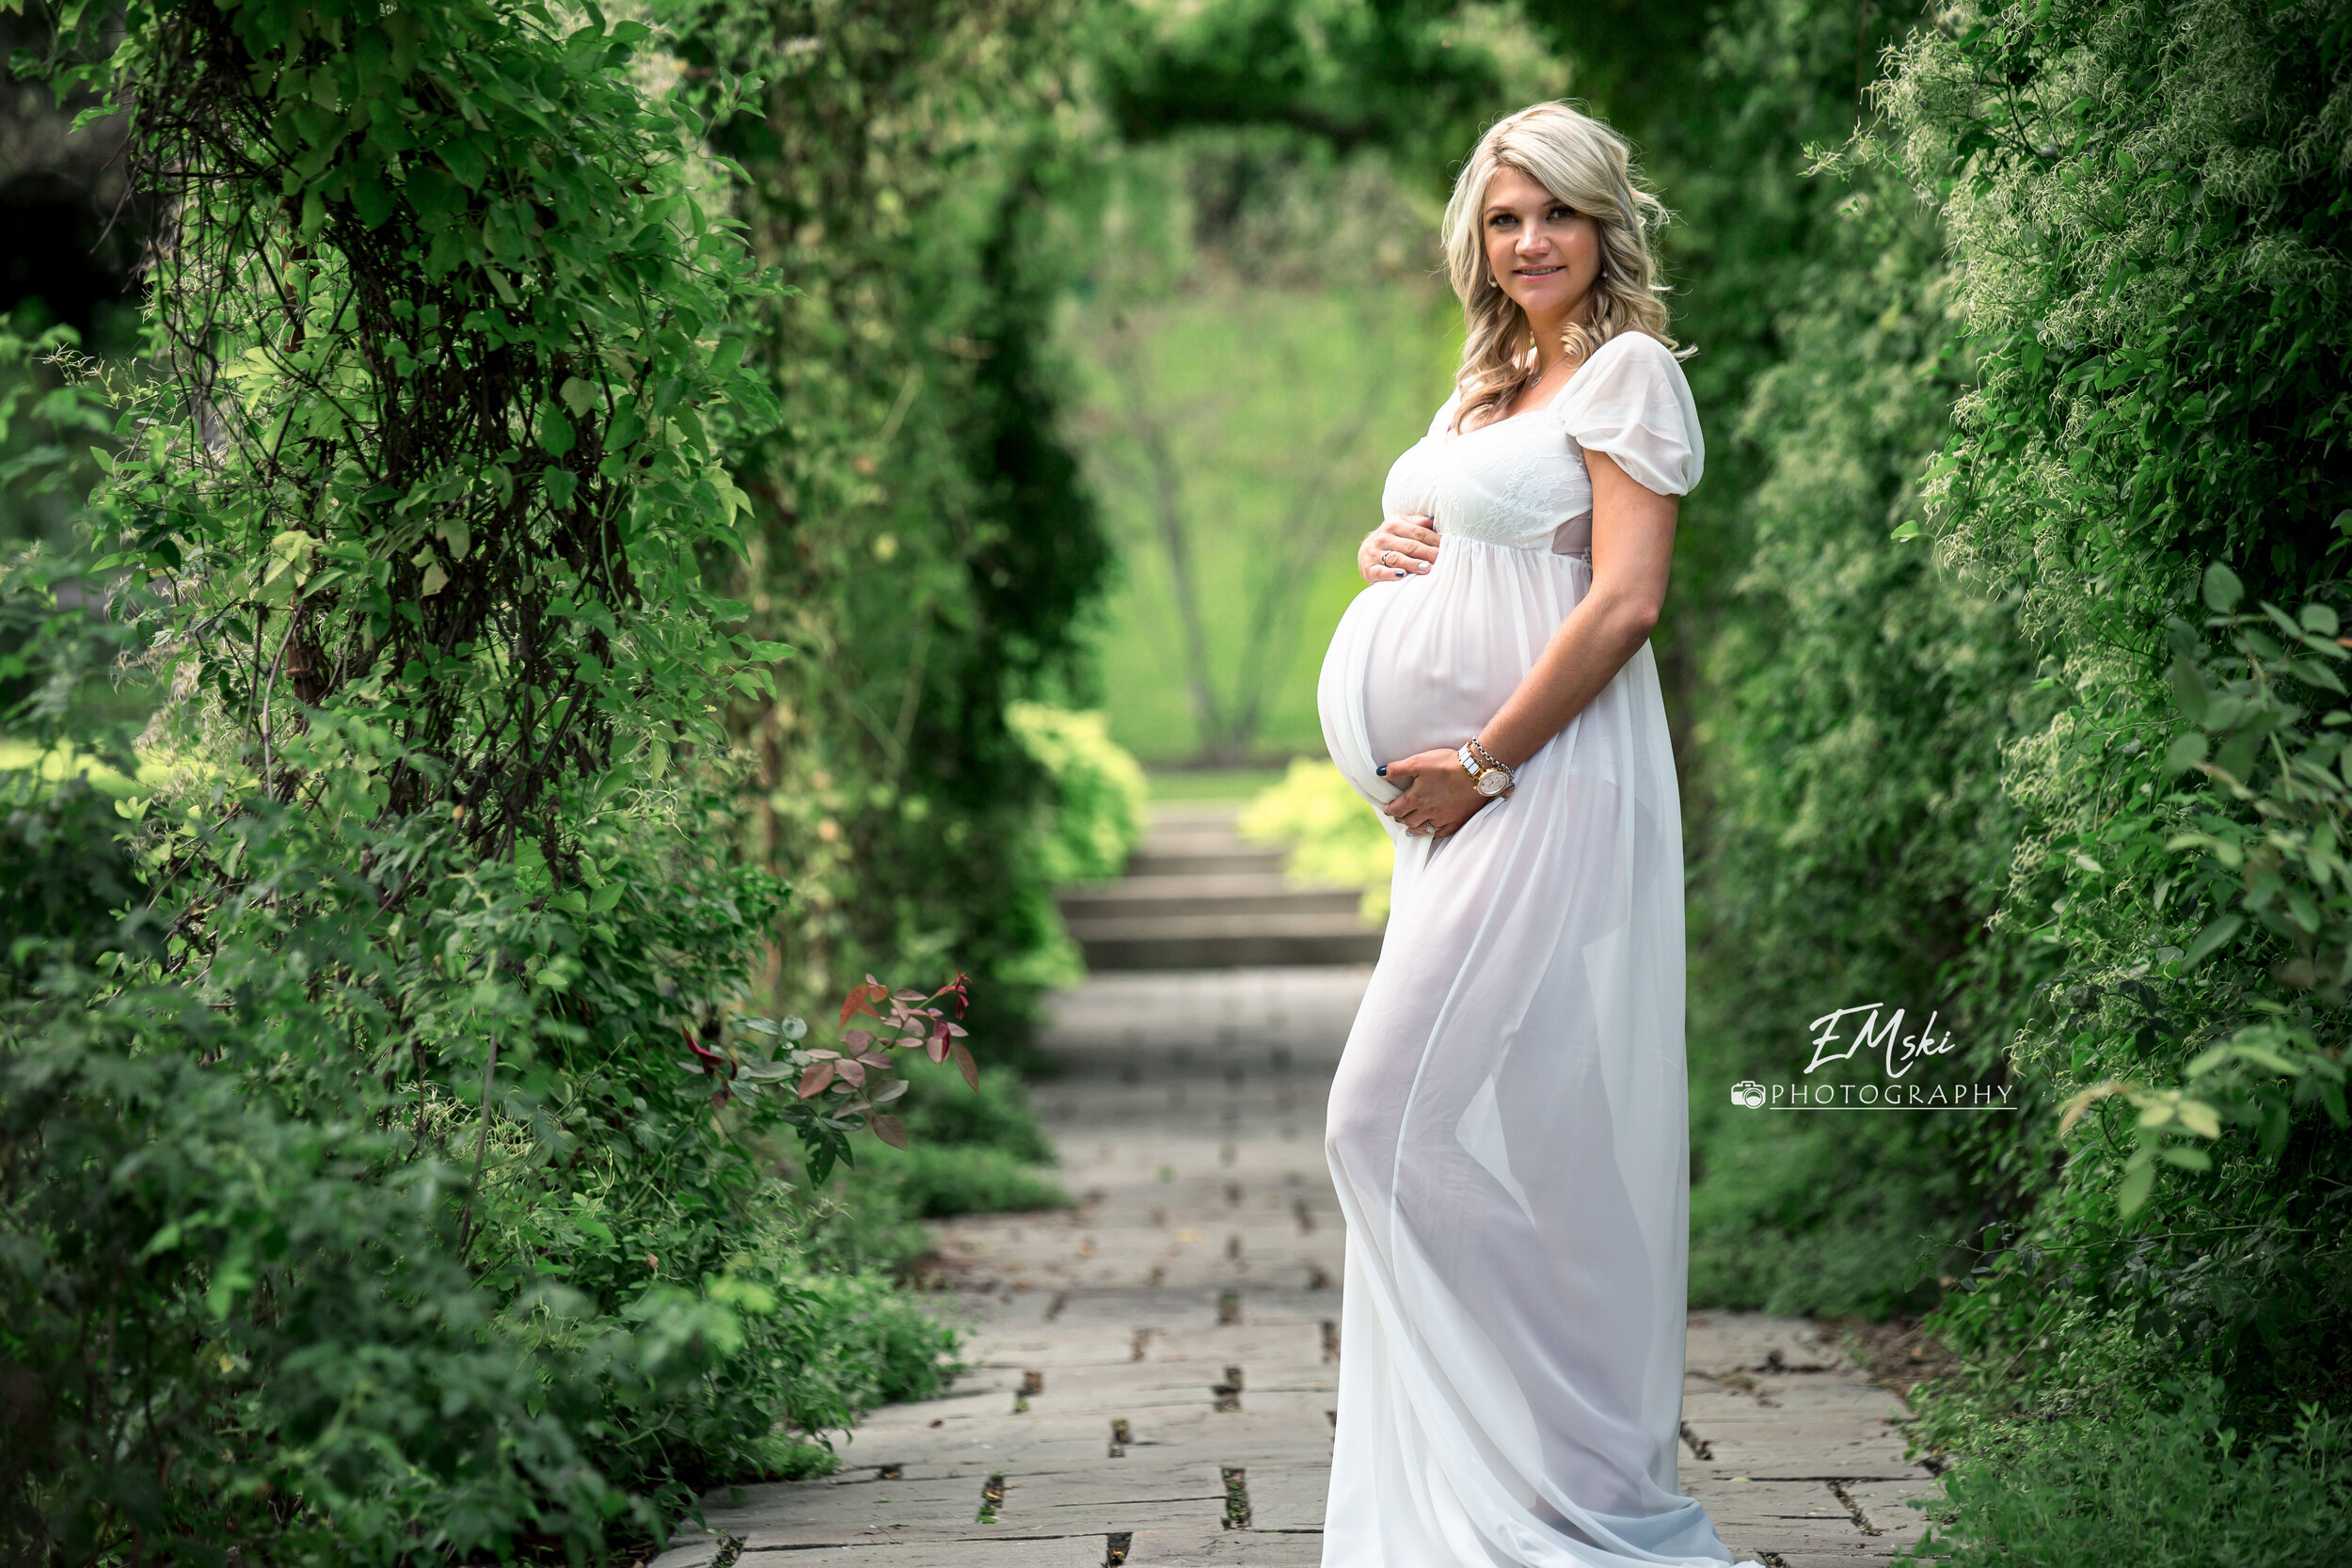 Maternity Photography, Family Photography in Algonquin, Lake in the Hills IL